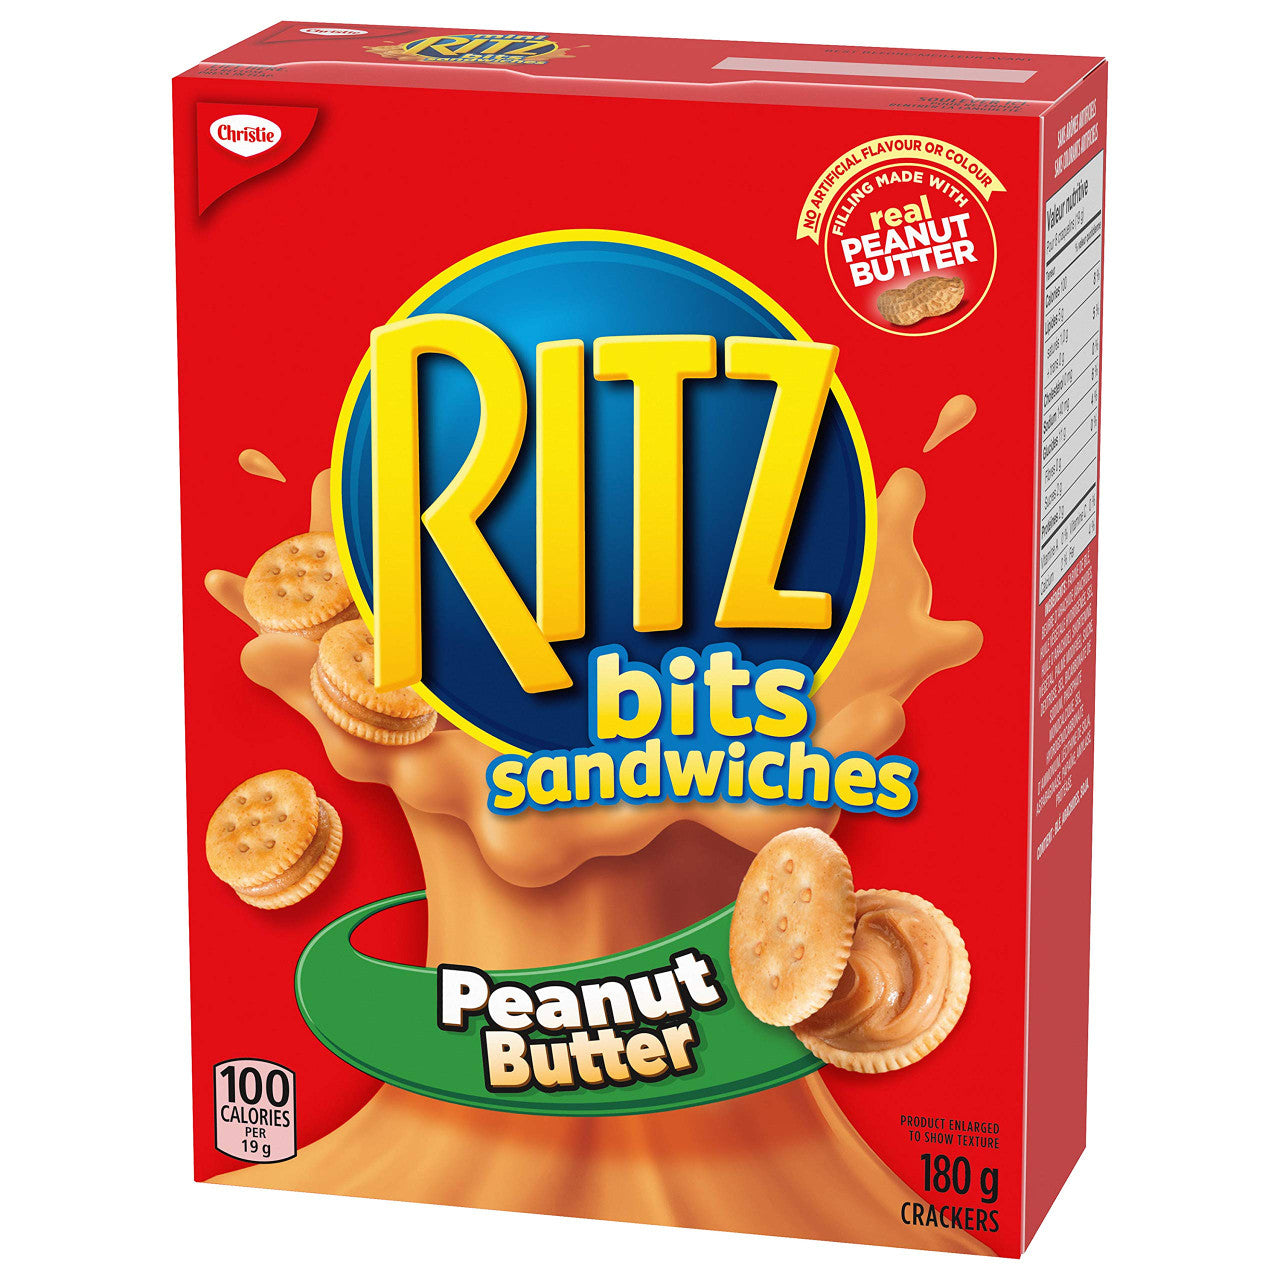 Ritz Bits Sandwiches Peanut Butter Flavour 180g/6.35oz {From Canada}